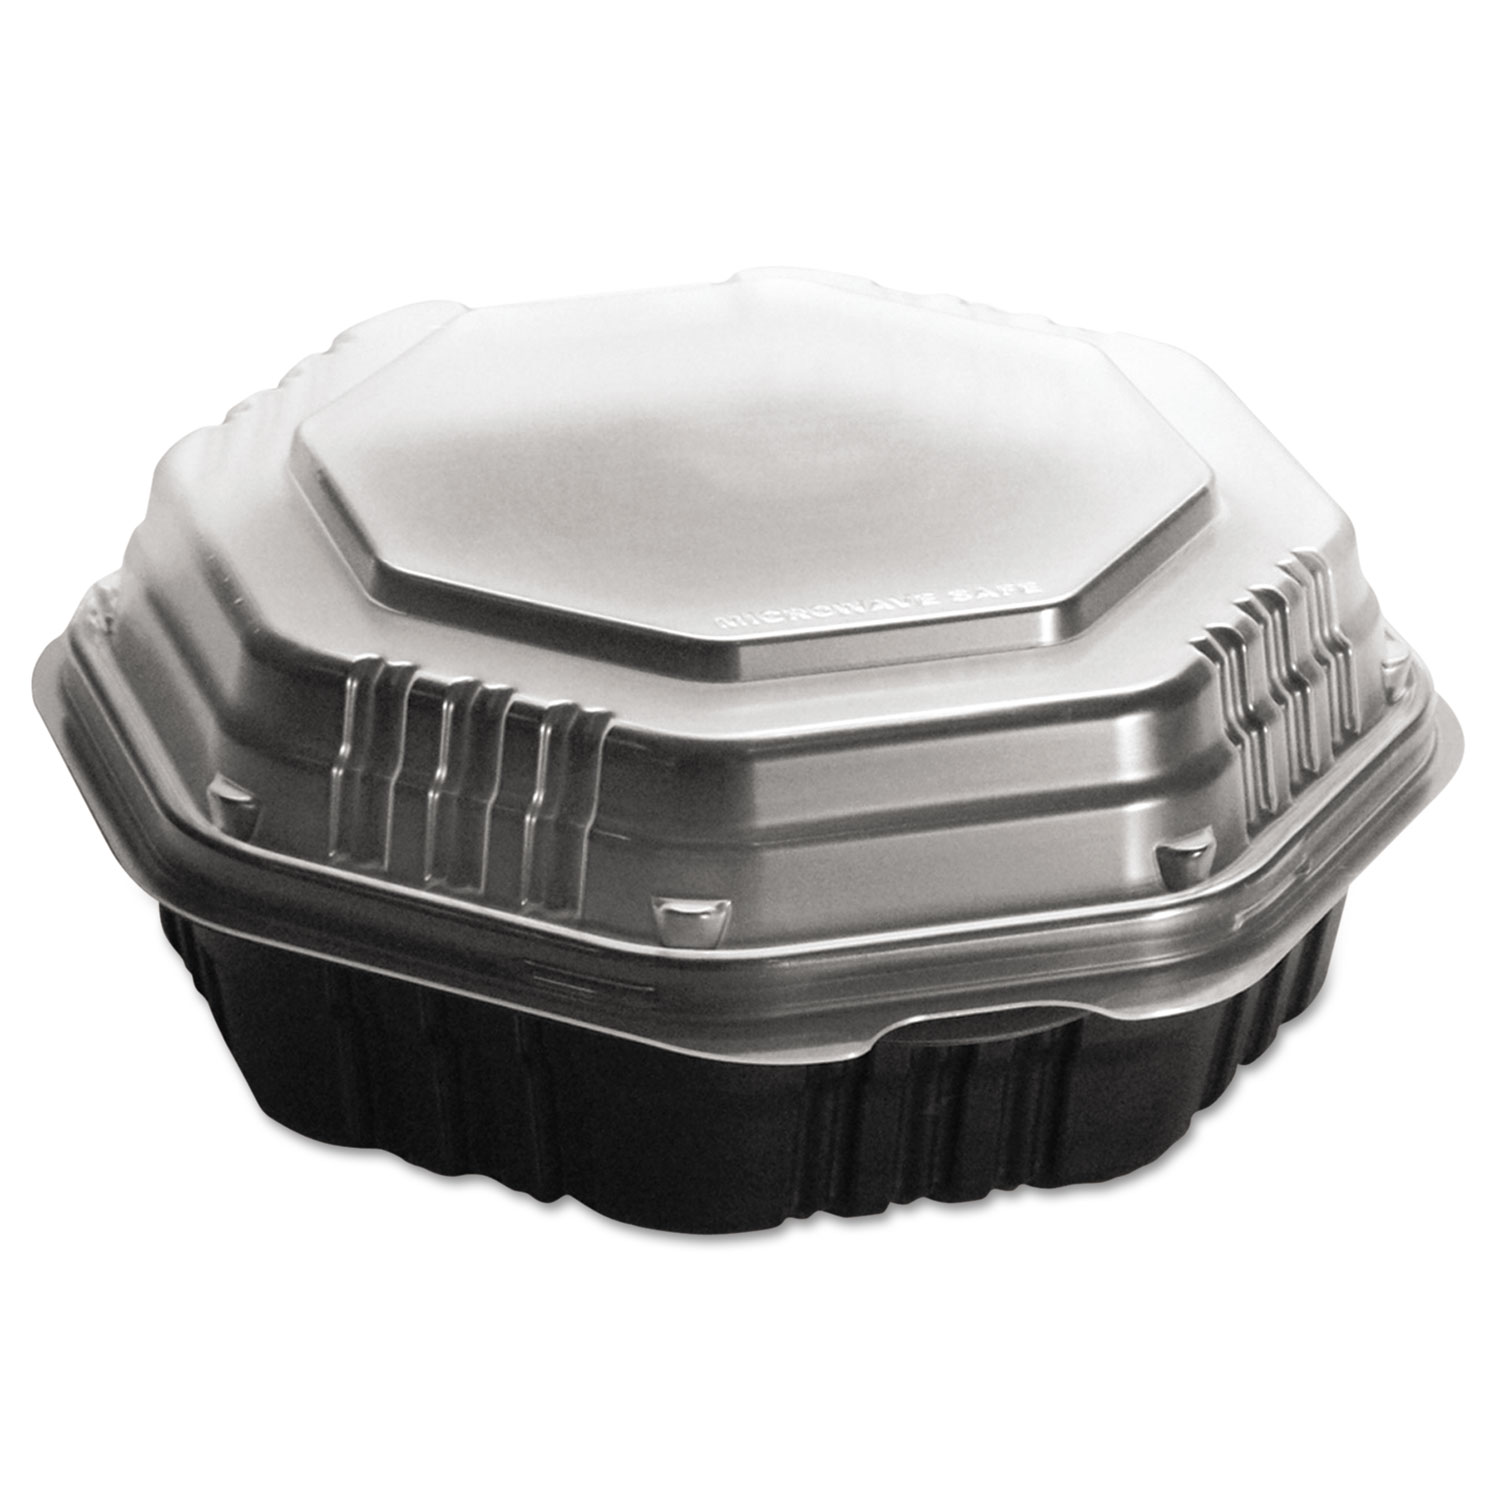  Dart 809011-PP94 OctaView HF Containers, Black/Clear, 31oz, 9.55w x 9.13d x 3.01h, 100/Carton (SCC809011PP94) 